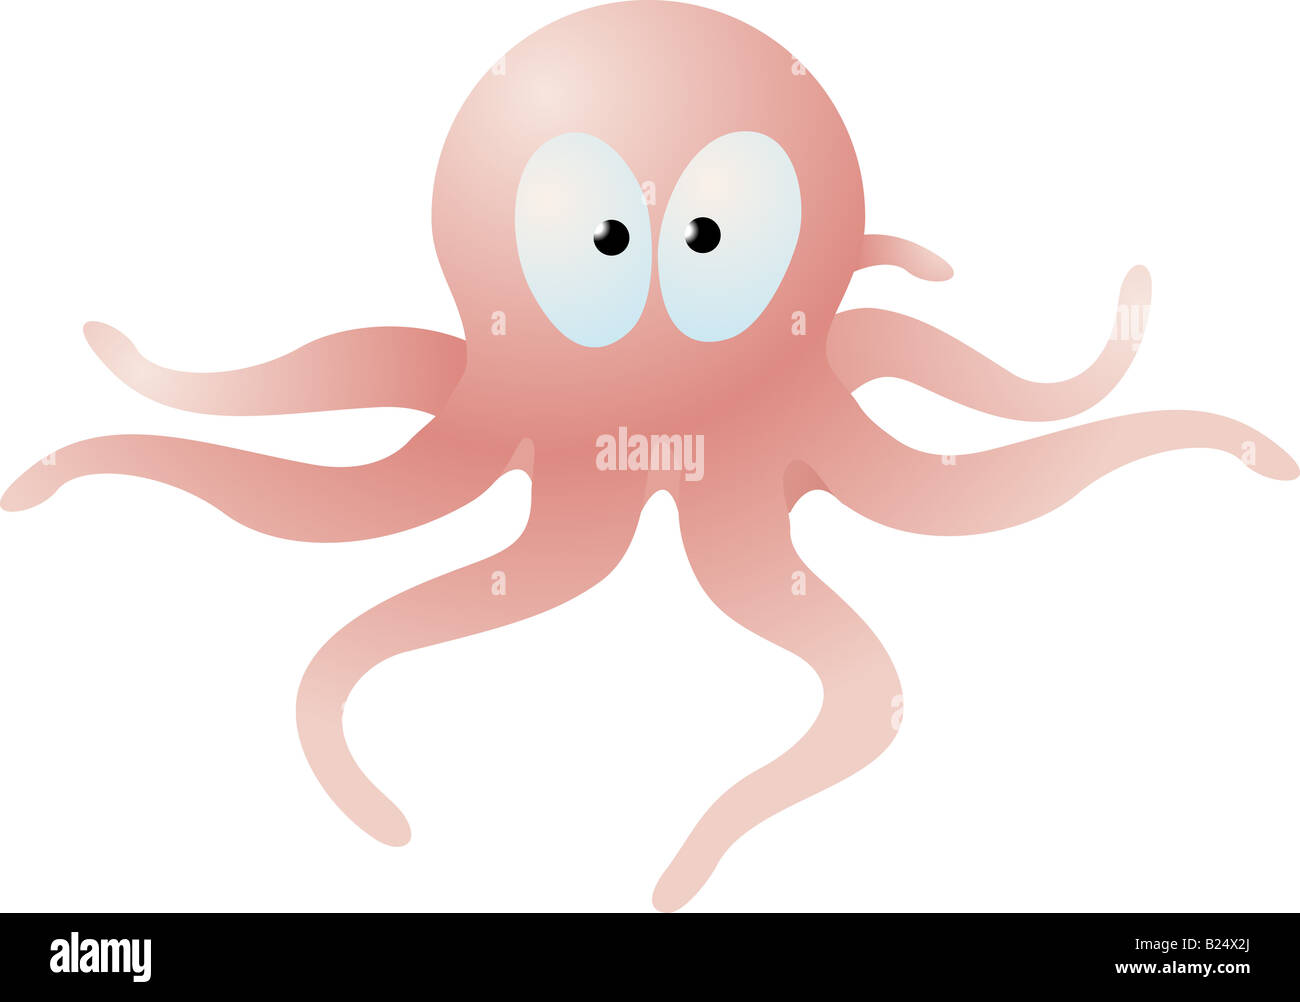 illustration of a cute octopus cartoon character Stock Photo